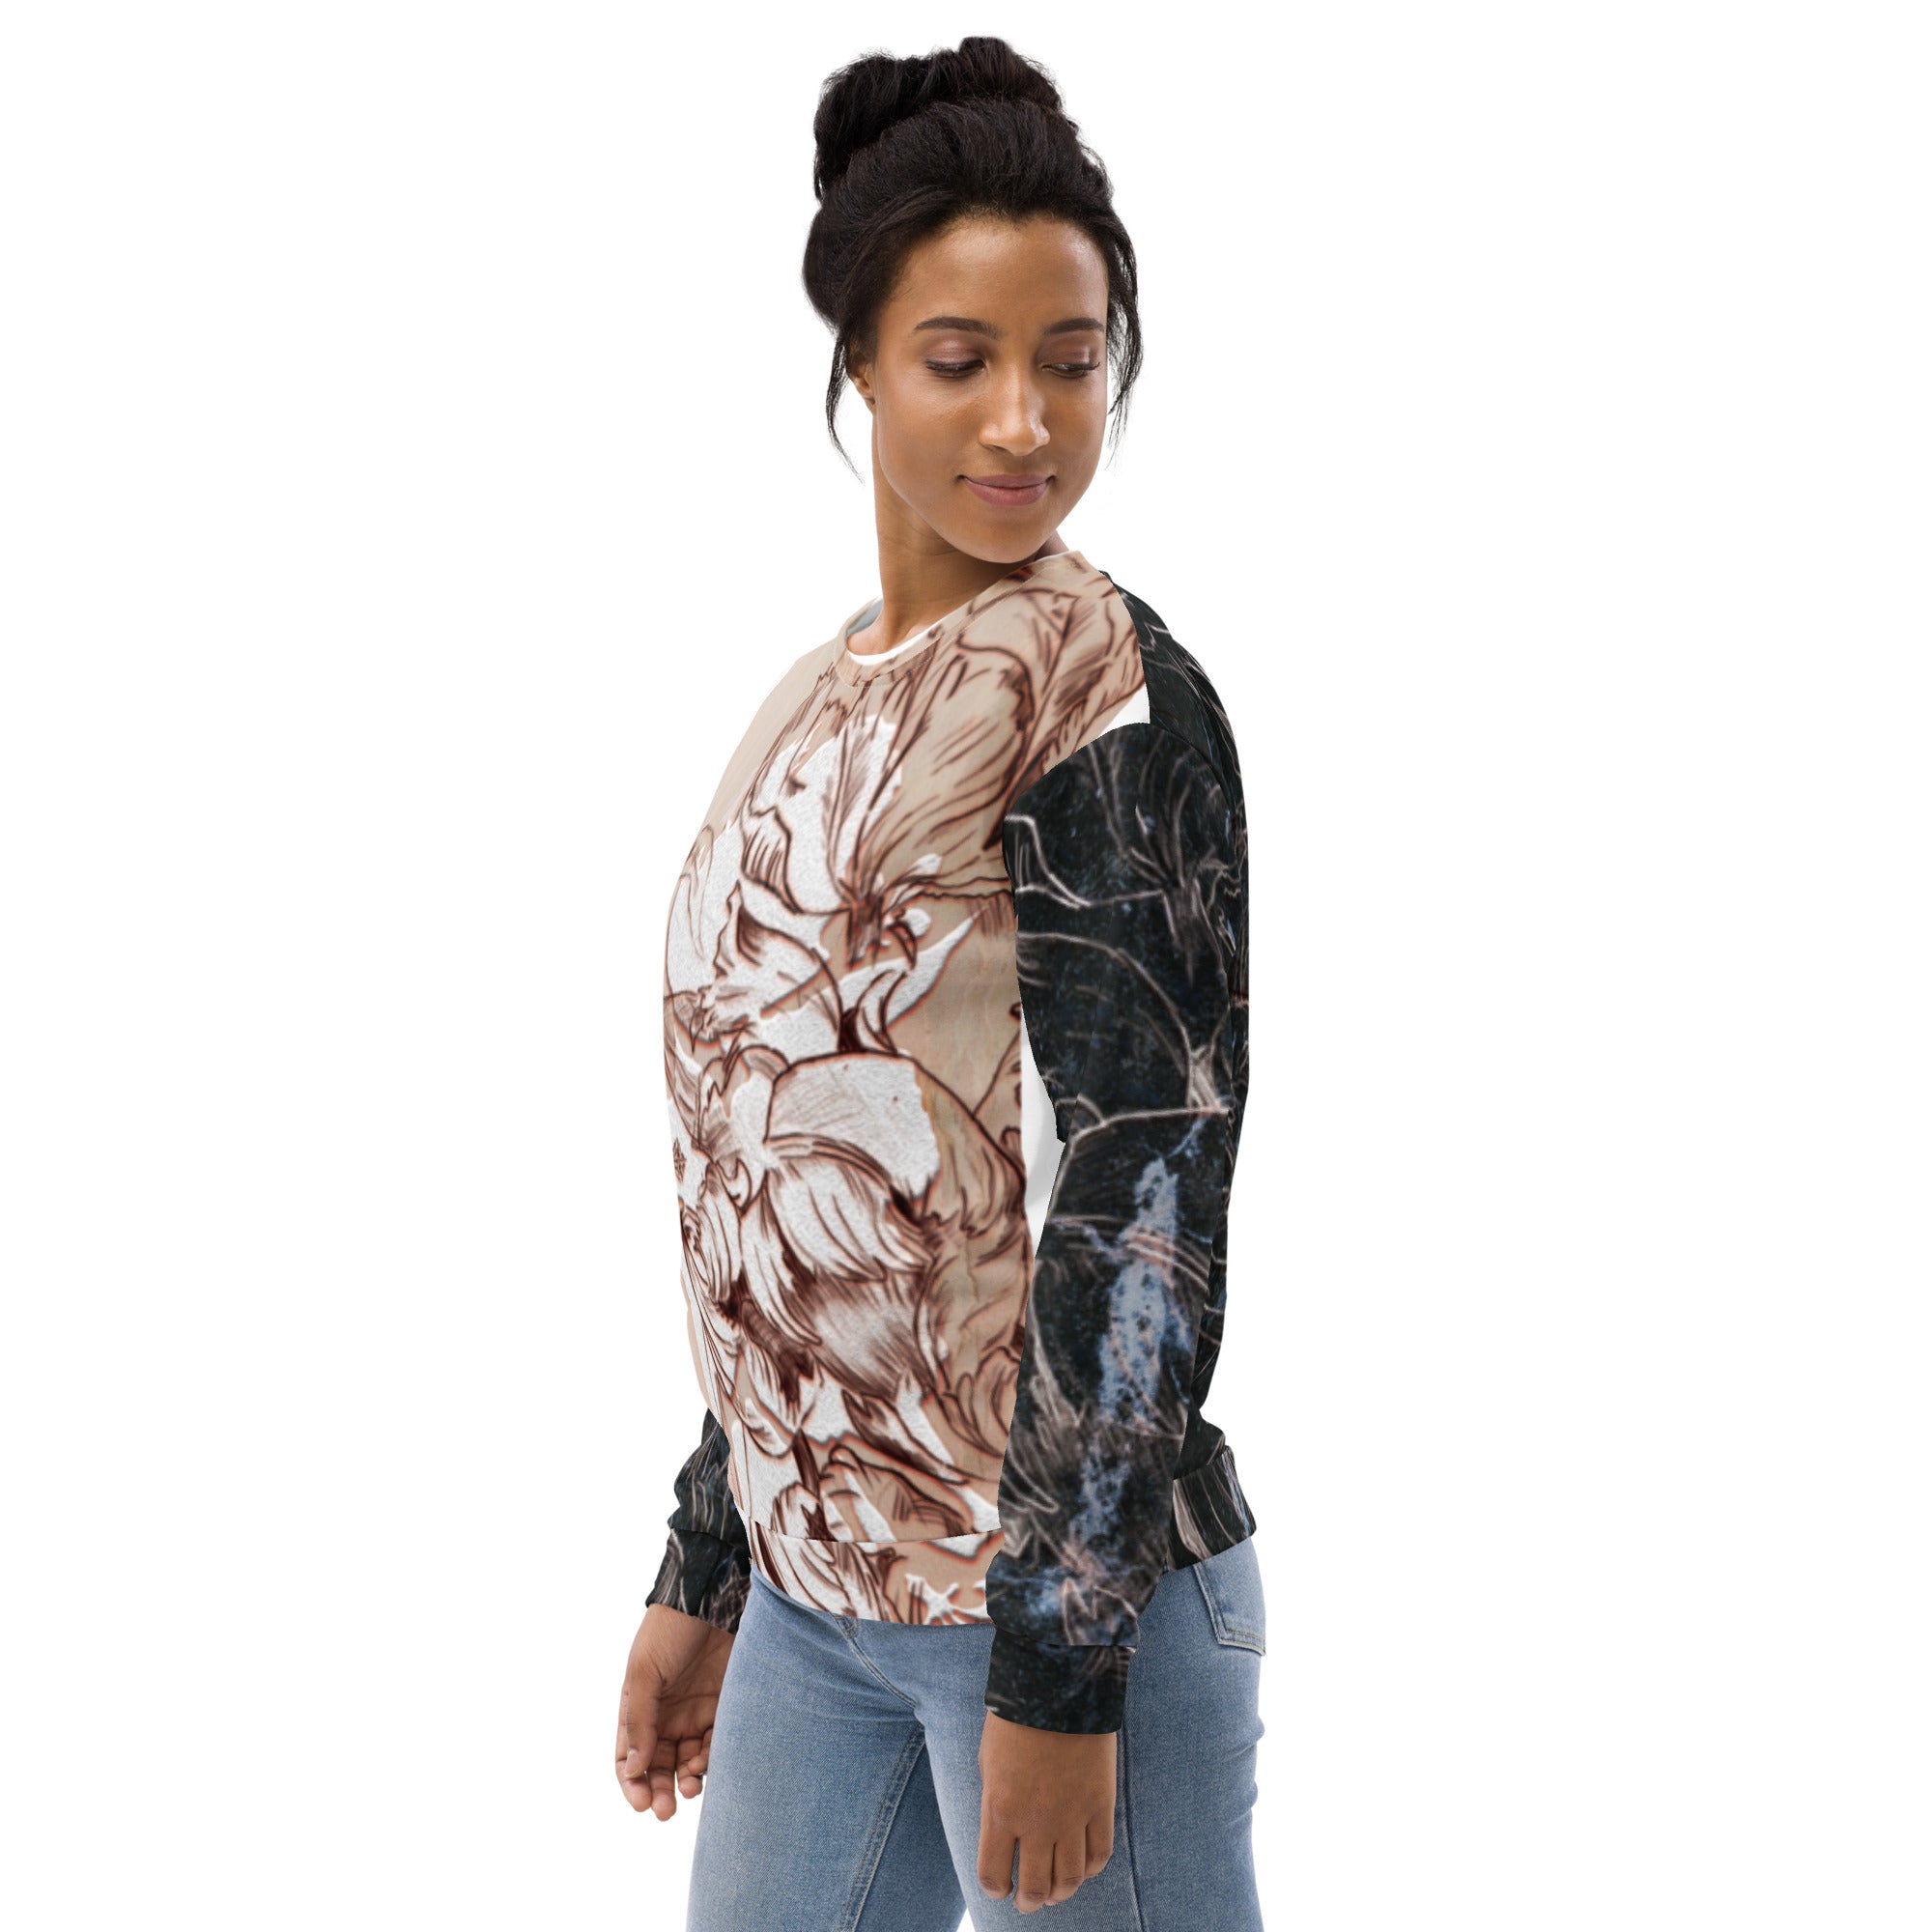 Anacotte Unisex Abstract Floral Full Printed Sweatshirt